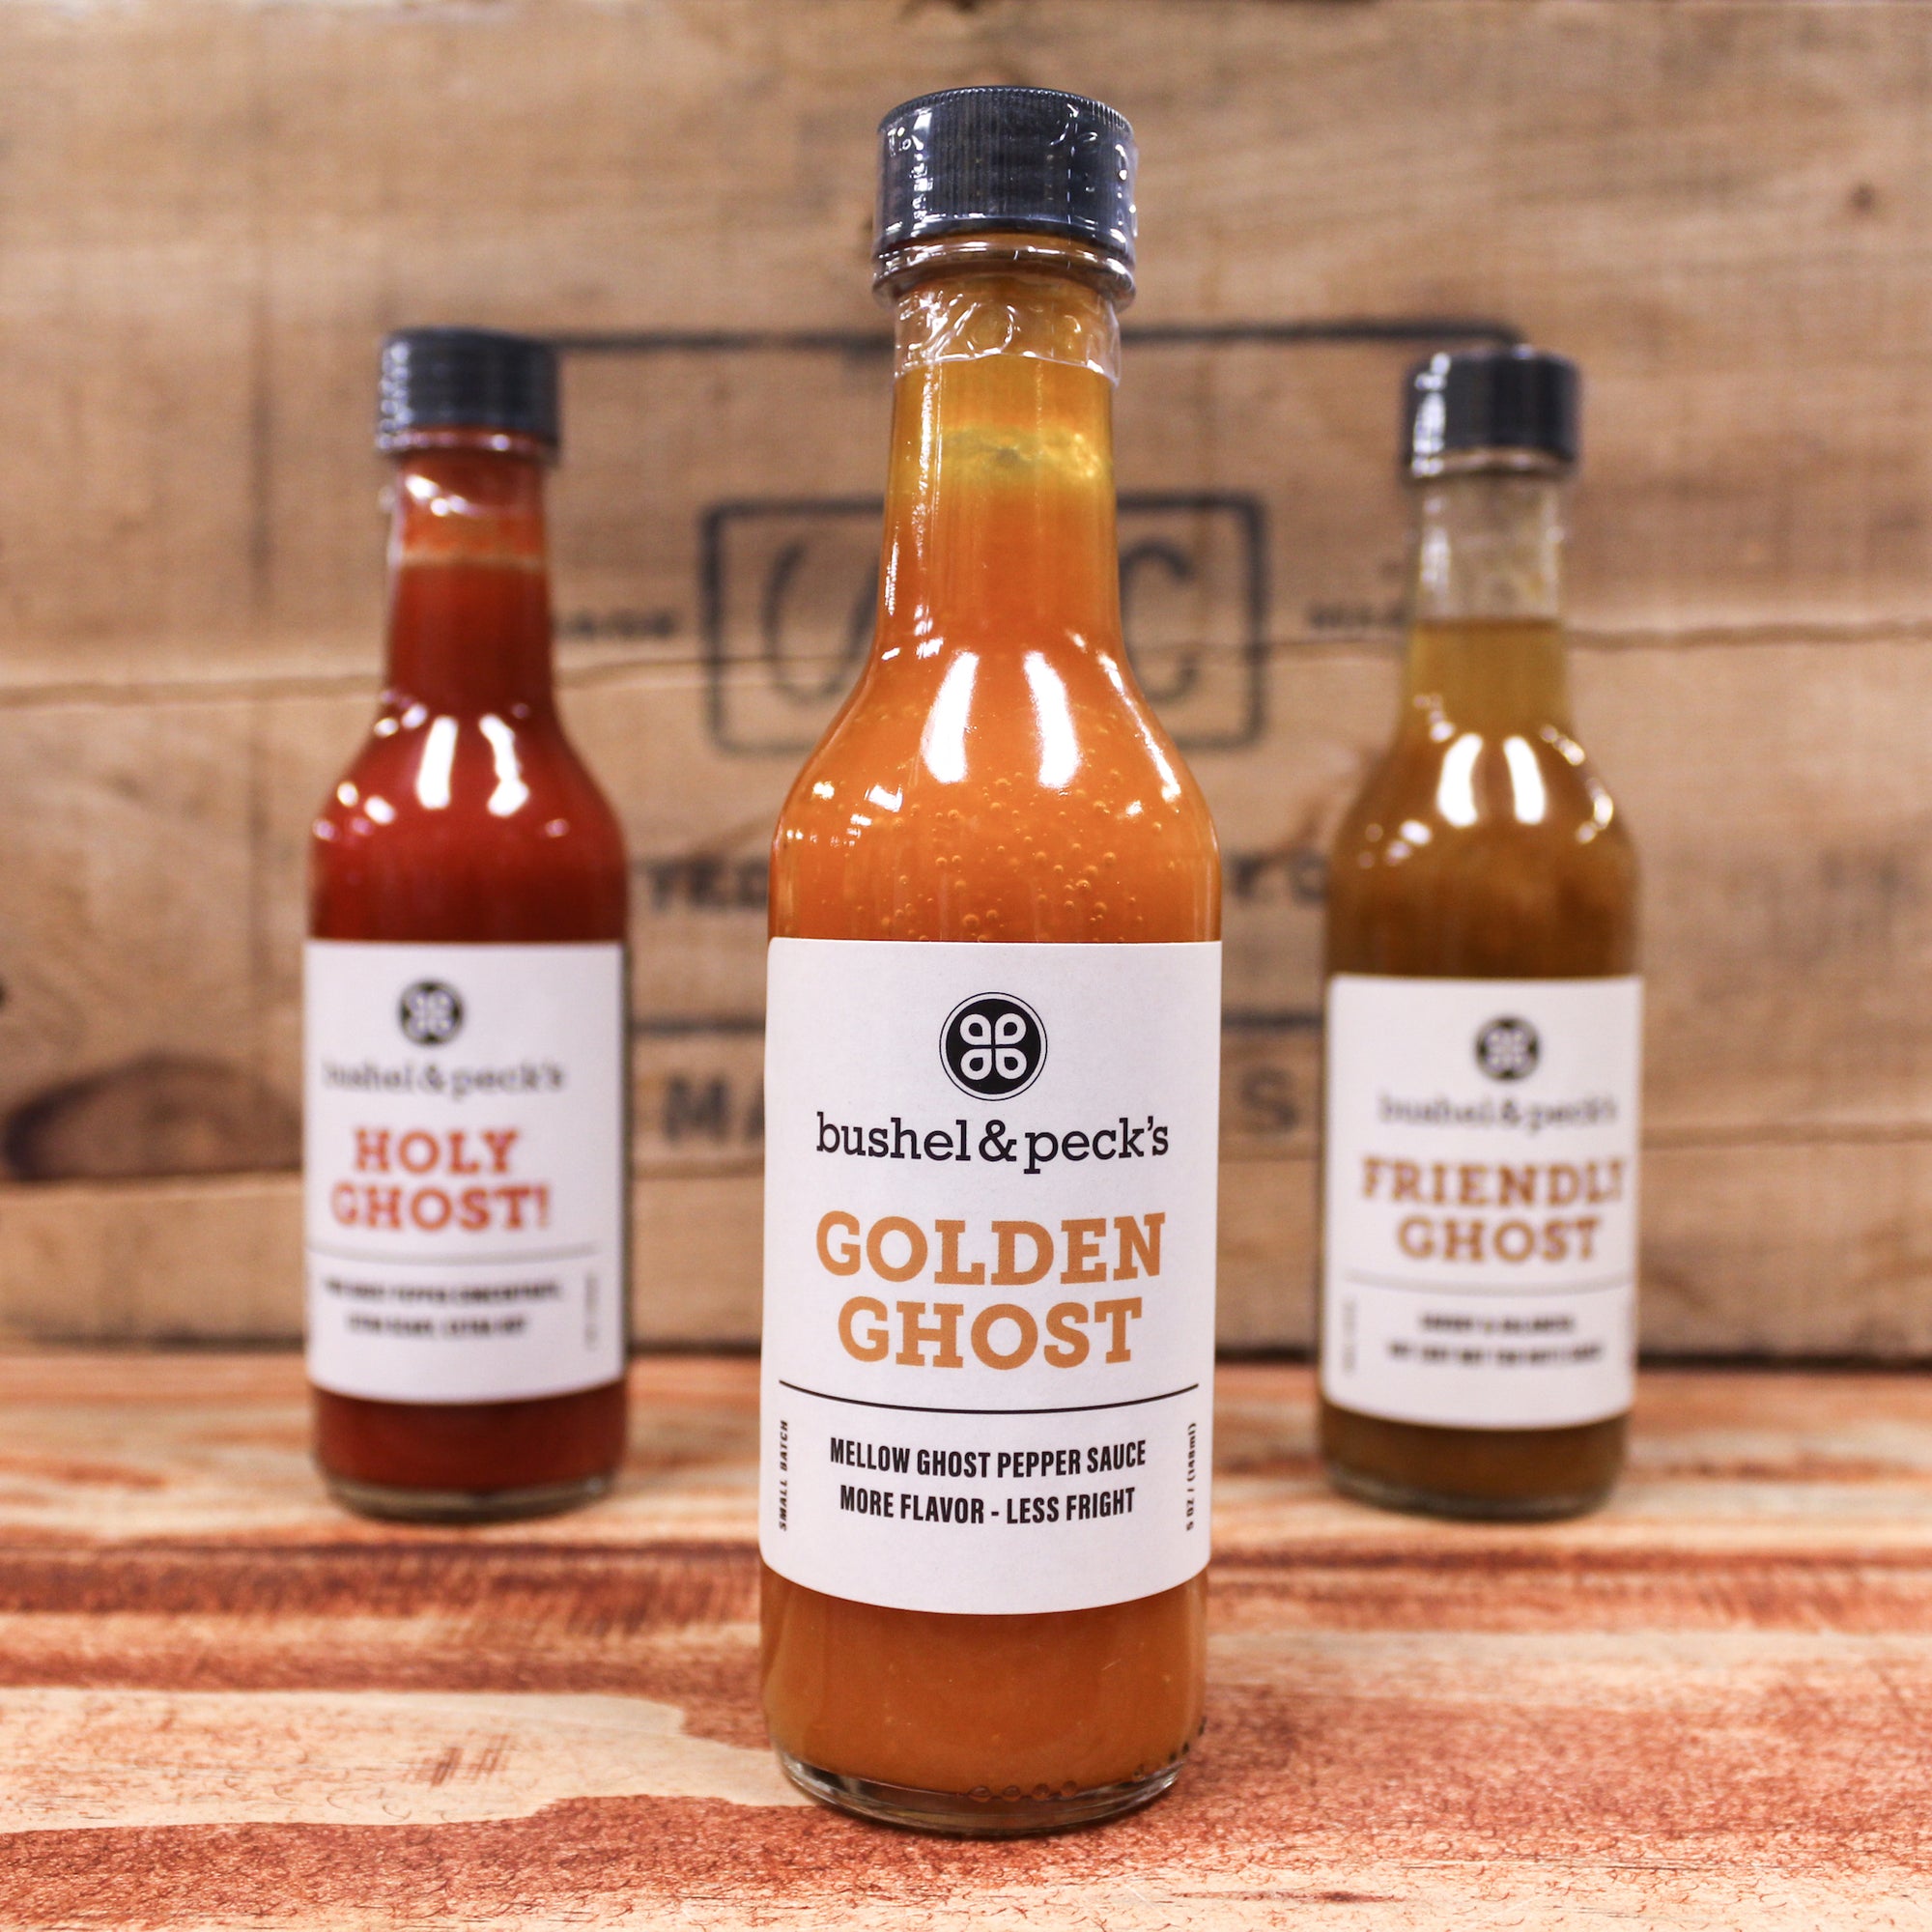 Ghost Pepper Hot Sauce - The Ghost Pepper Trinity! Holy Ghost, Friendly Ghost and Golden Ghost